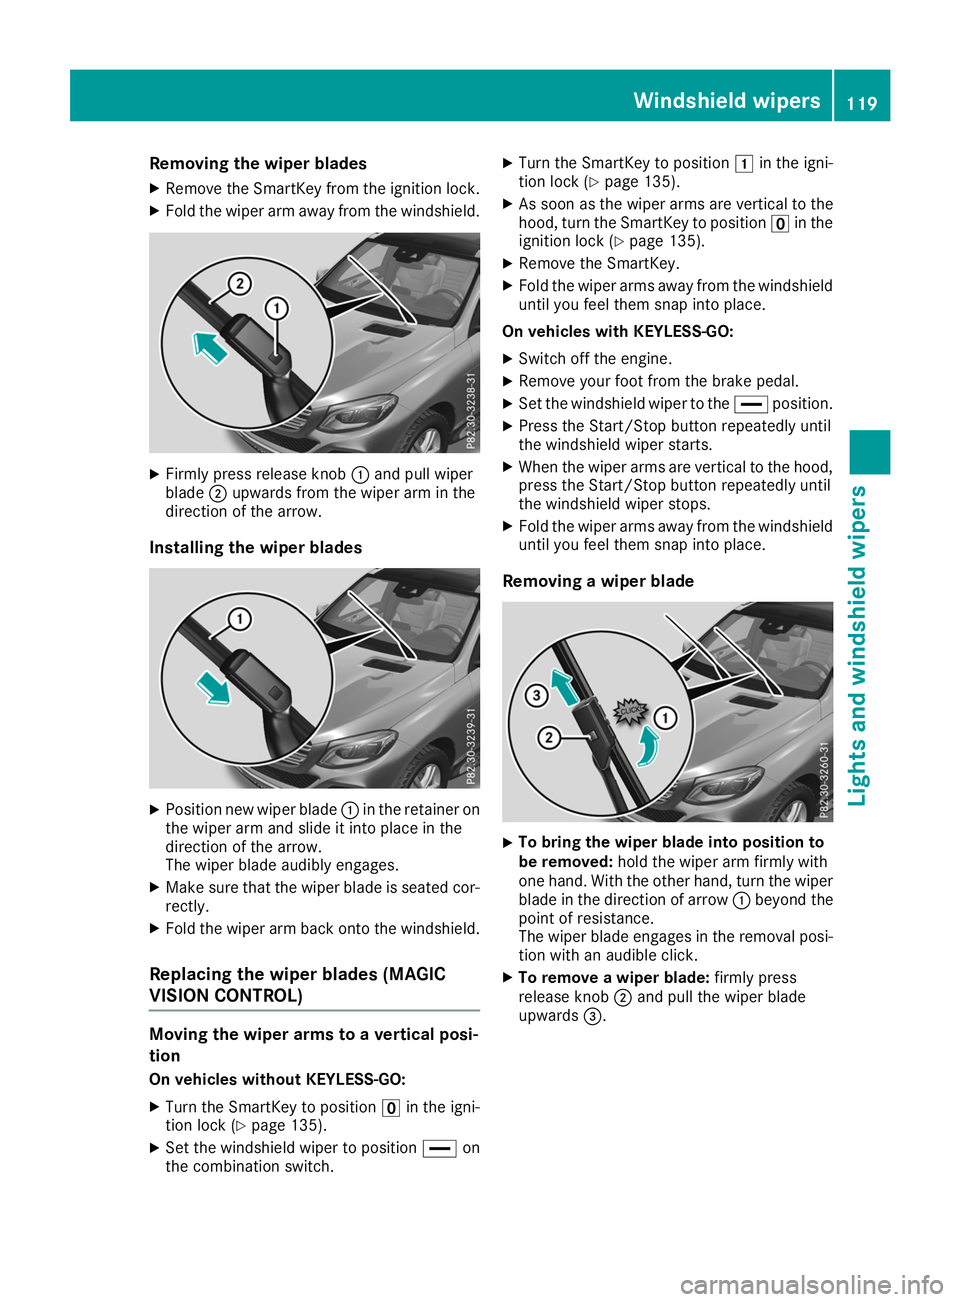 MERCEDES-BENZ GLE SUV 2019  Owners Manual Removing the wiper blades
X Remove the SmartKey from the ignition lock.
X Fold the wiper arm away from the windshield. X
Firmly press release knob 0043and pull wiper
blade 0044upwards from the wiper a